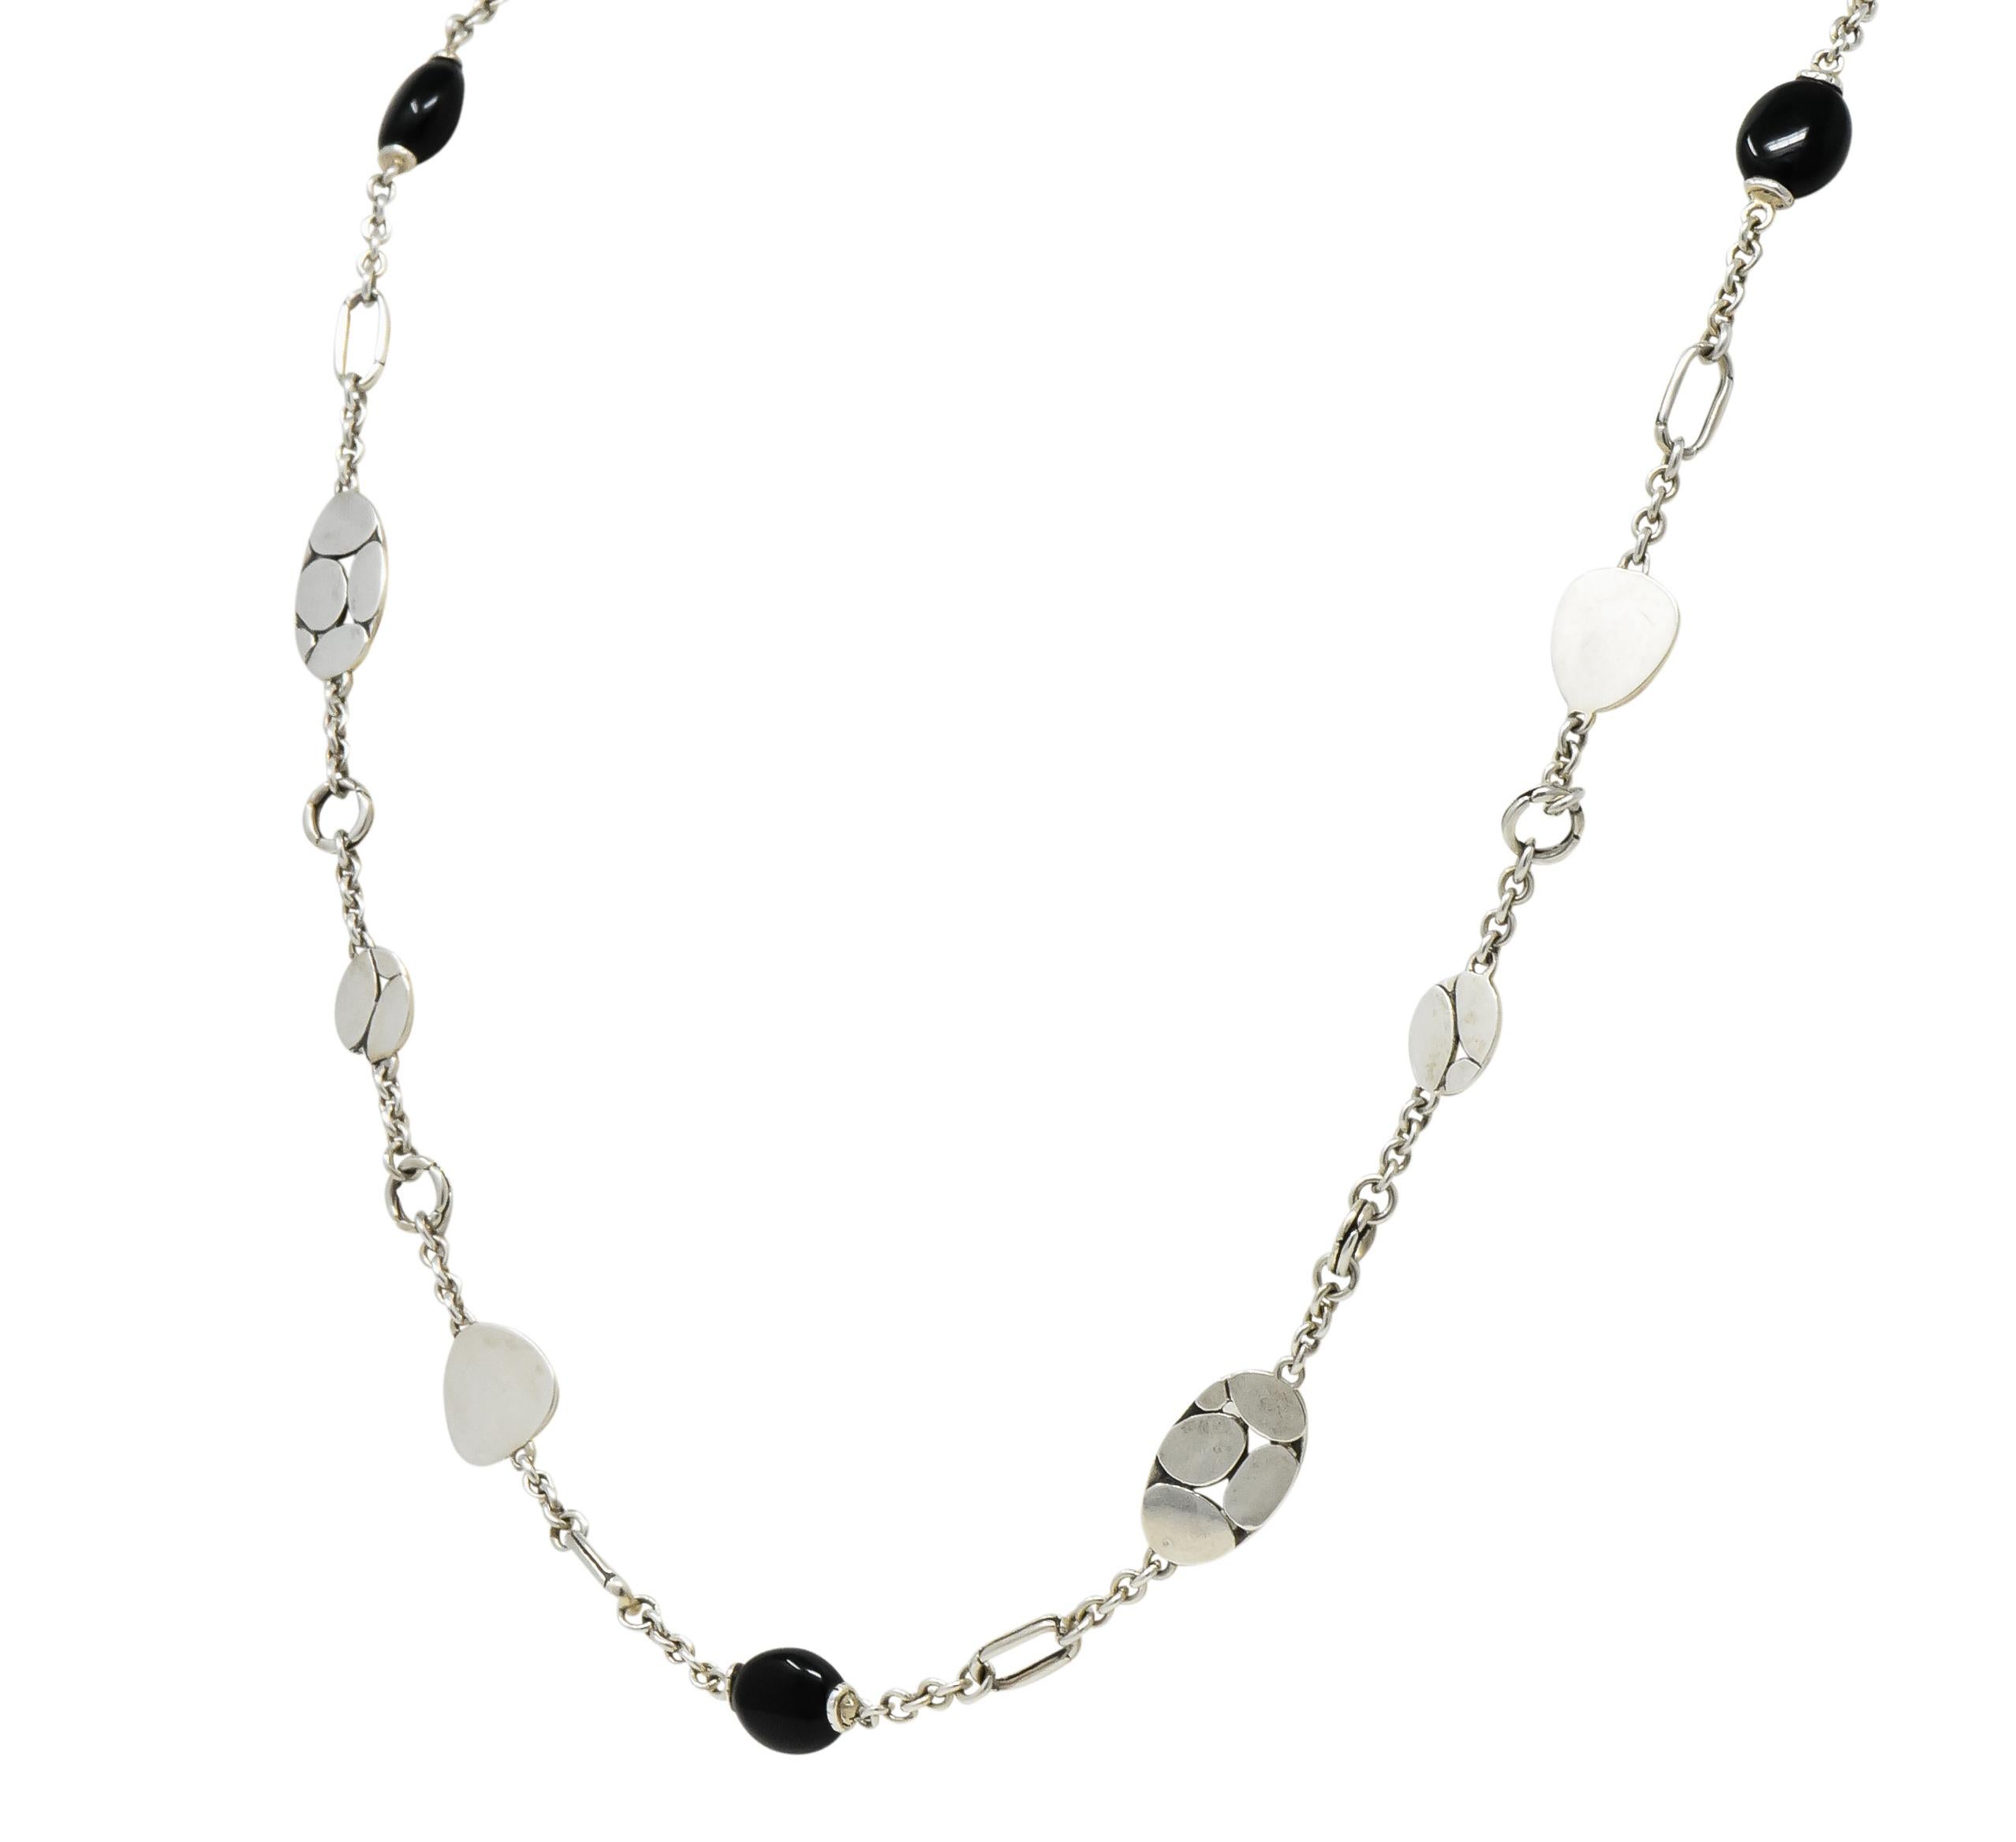 Station style necklace with seven smooth, oval onyx beads measuring approximately 8.0 mm x 9.0 mm, opaque, polished, and black

With flat sterling silver stations varying in size and shape, some polished bright, others with pierced dot